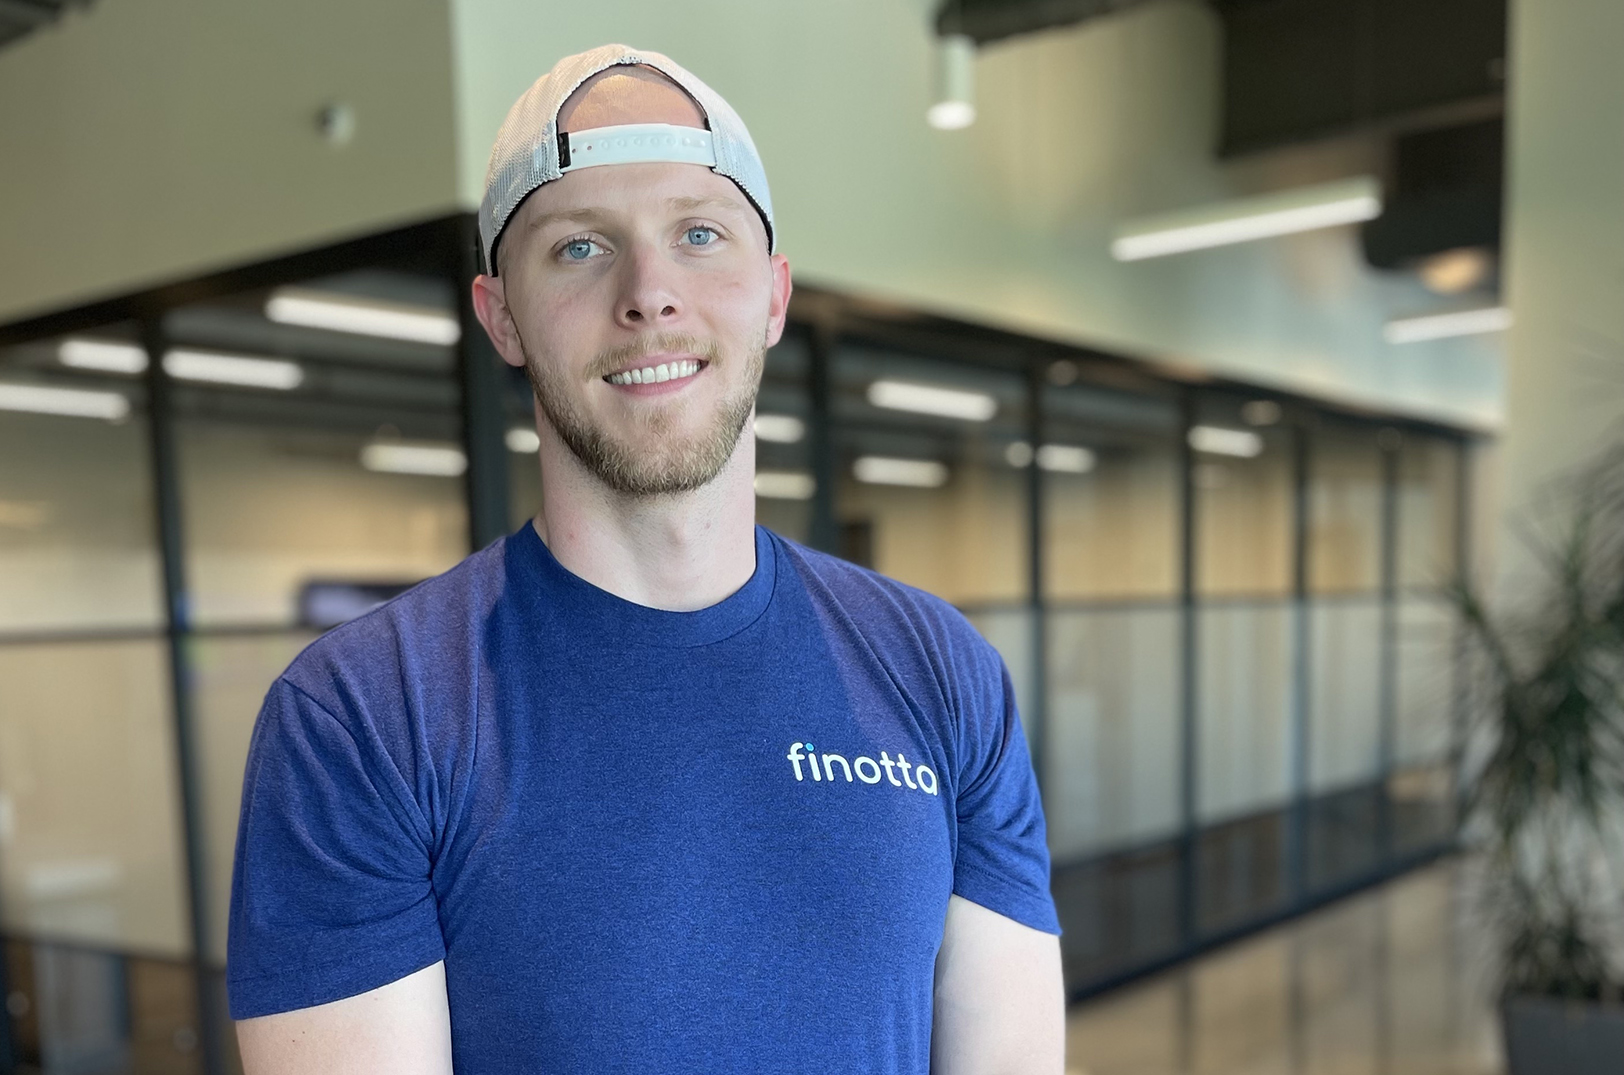 How Finotta emerged from 2020’s perils with a leap of faith, $3M investment banked